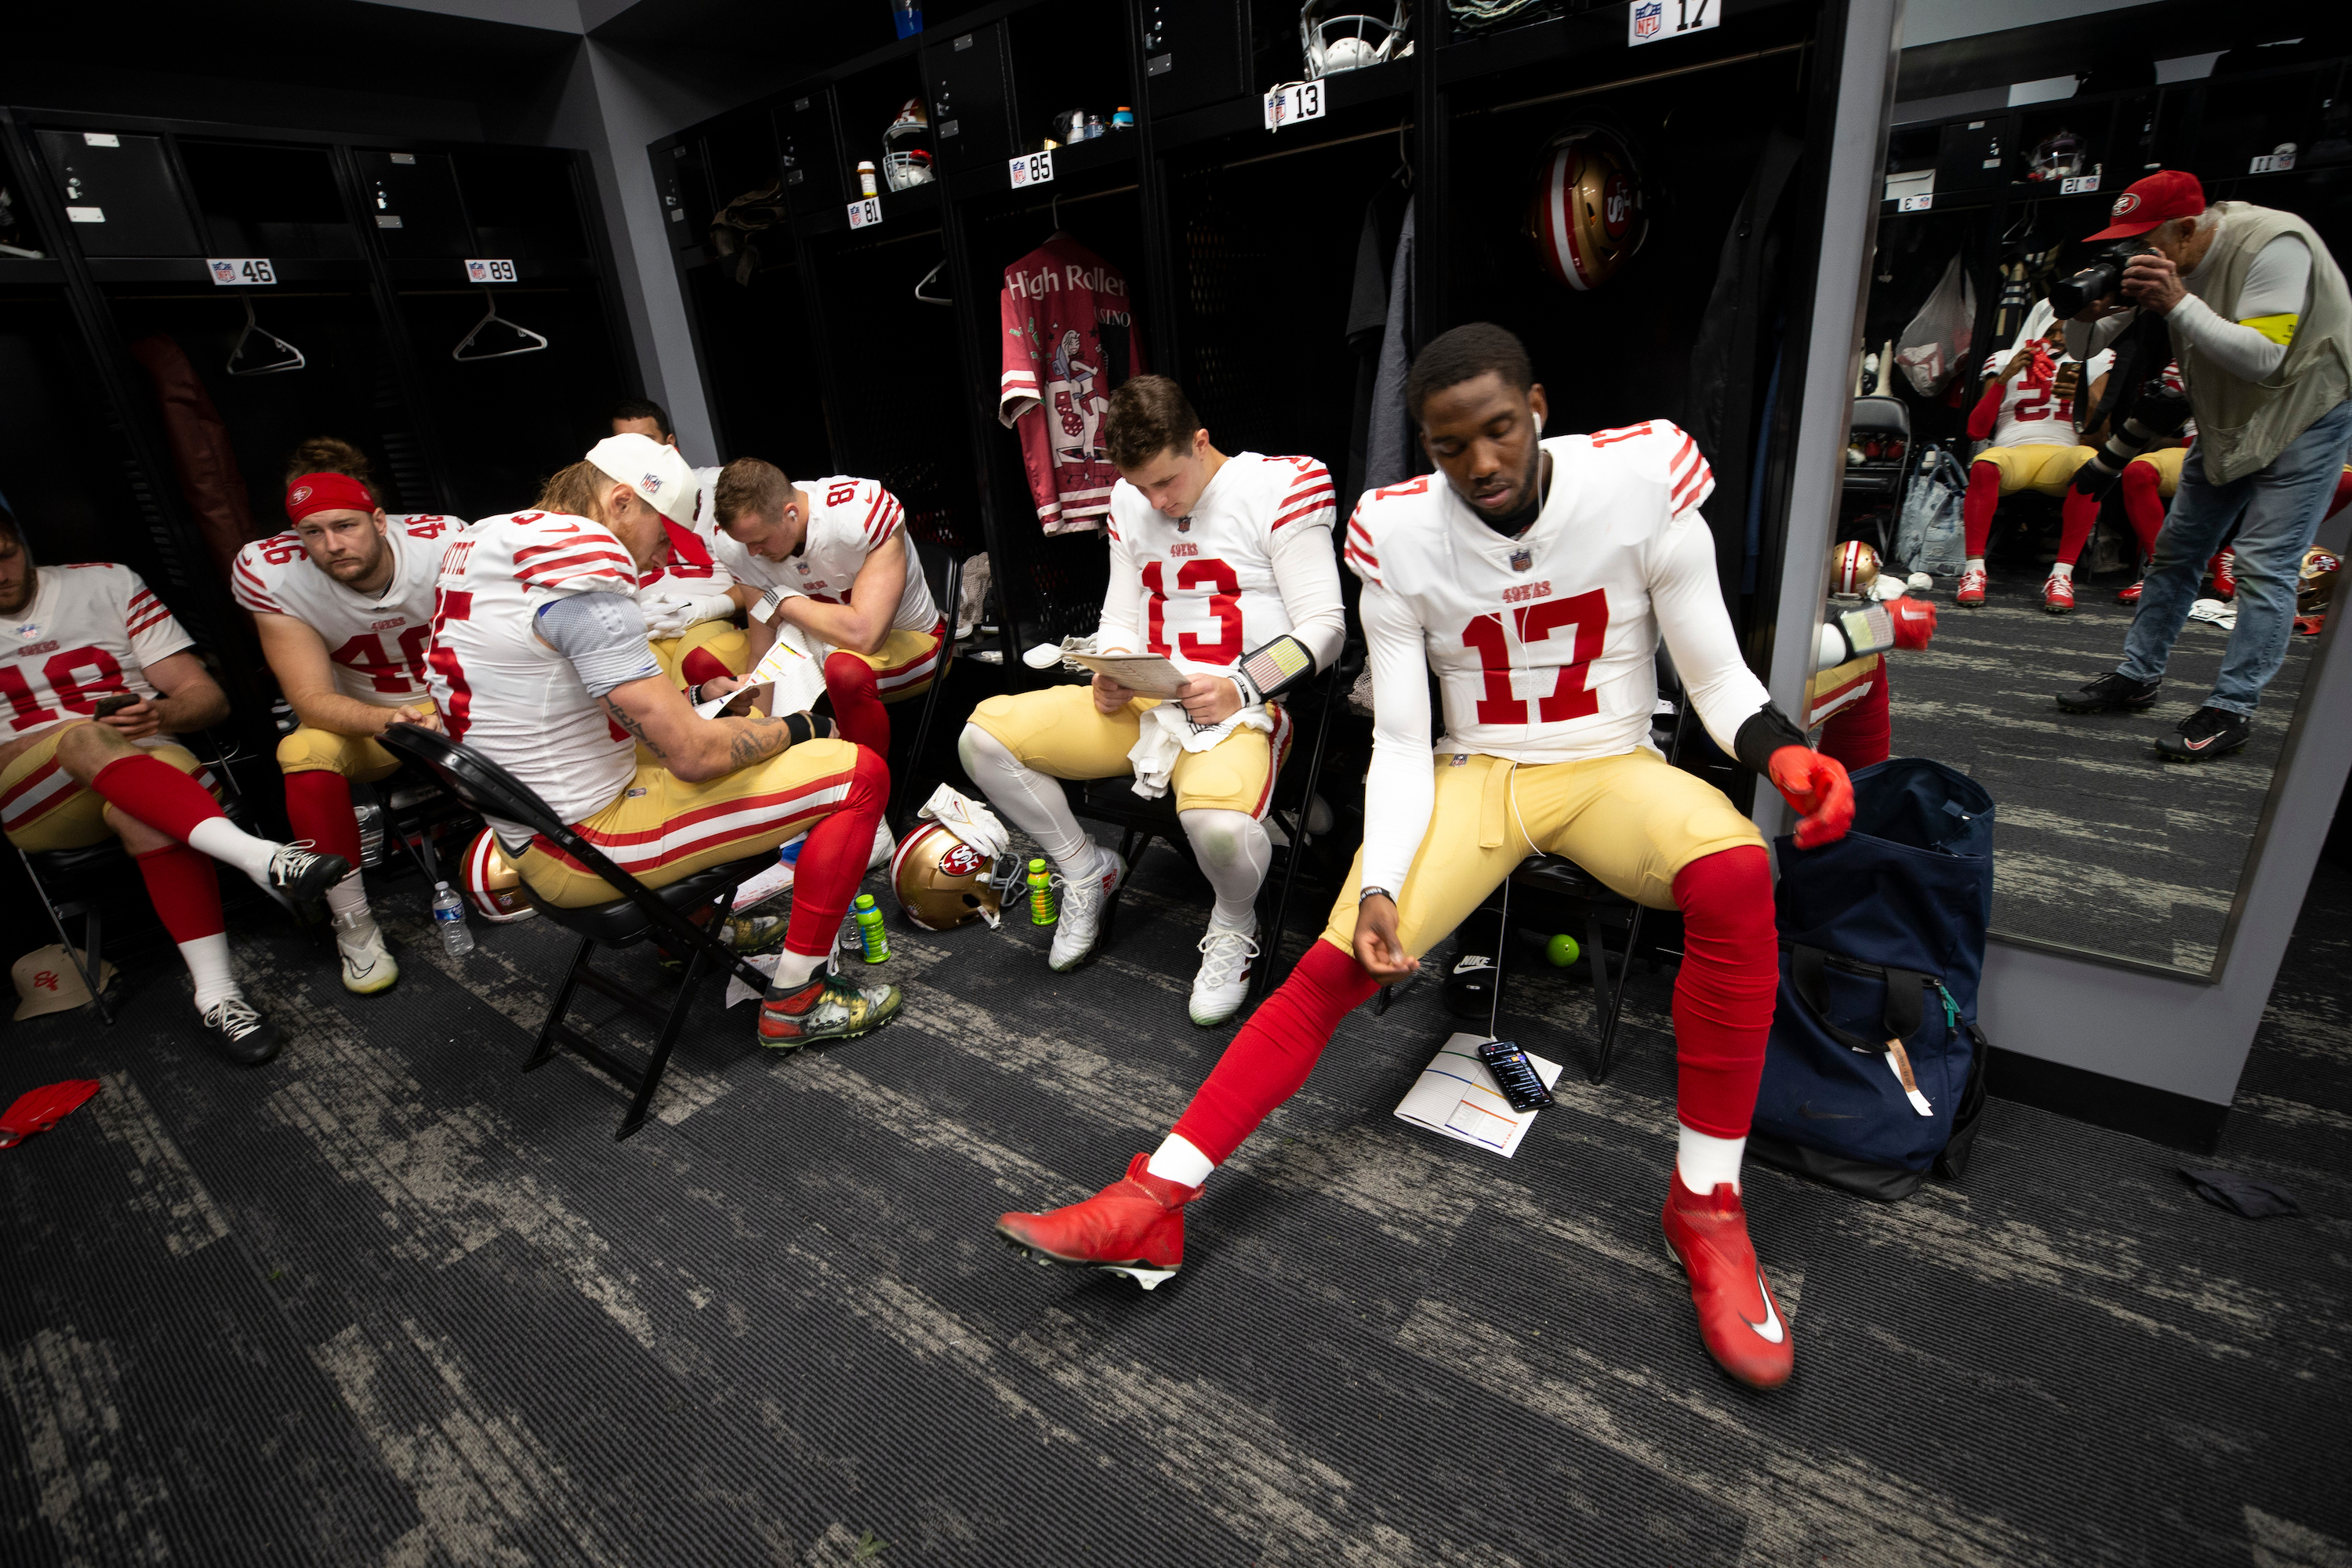 LAS VEGAS, NV - JANUARY 1: George Kittle #85, Brock Purdy #13 and Josh Johnson #17 of the San Francisco 49ers in the locker room before the game against the Las Vegas Raiders at Allegiant Stadium on January 1, 2023 in Las Vegas, Nevada. The 49ers defeated the Raiders 37-34. (Photo by Michael Zagaris/San Francisco 49ers/Getty Images) *** Local Caption *** George Kittle;Brock Purdy;Josh Johnson